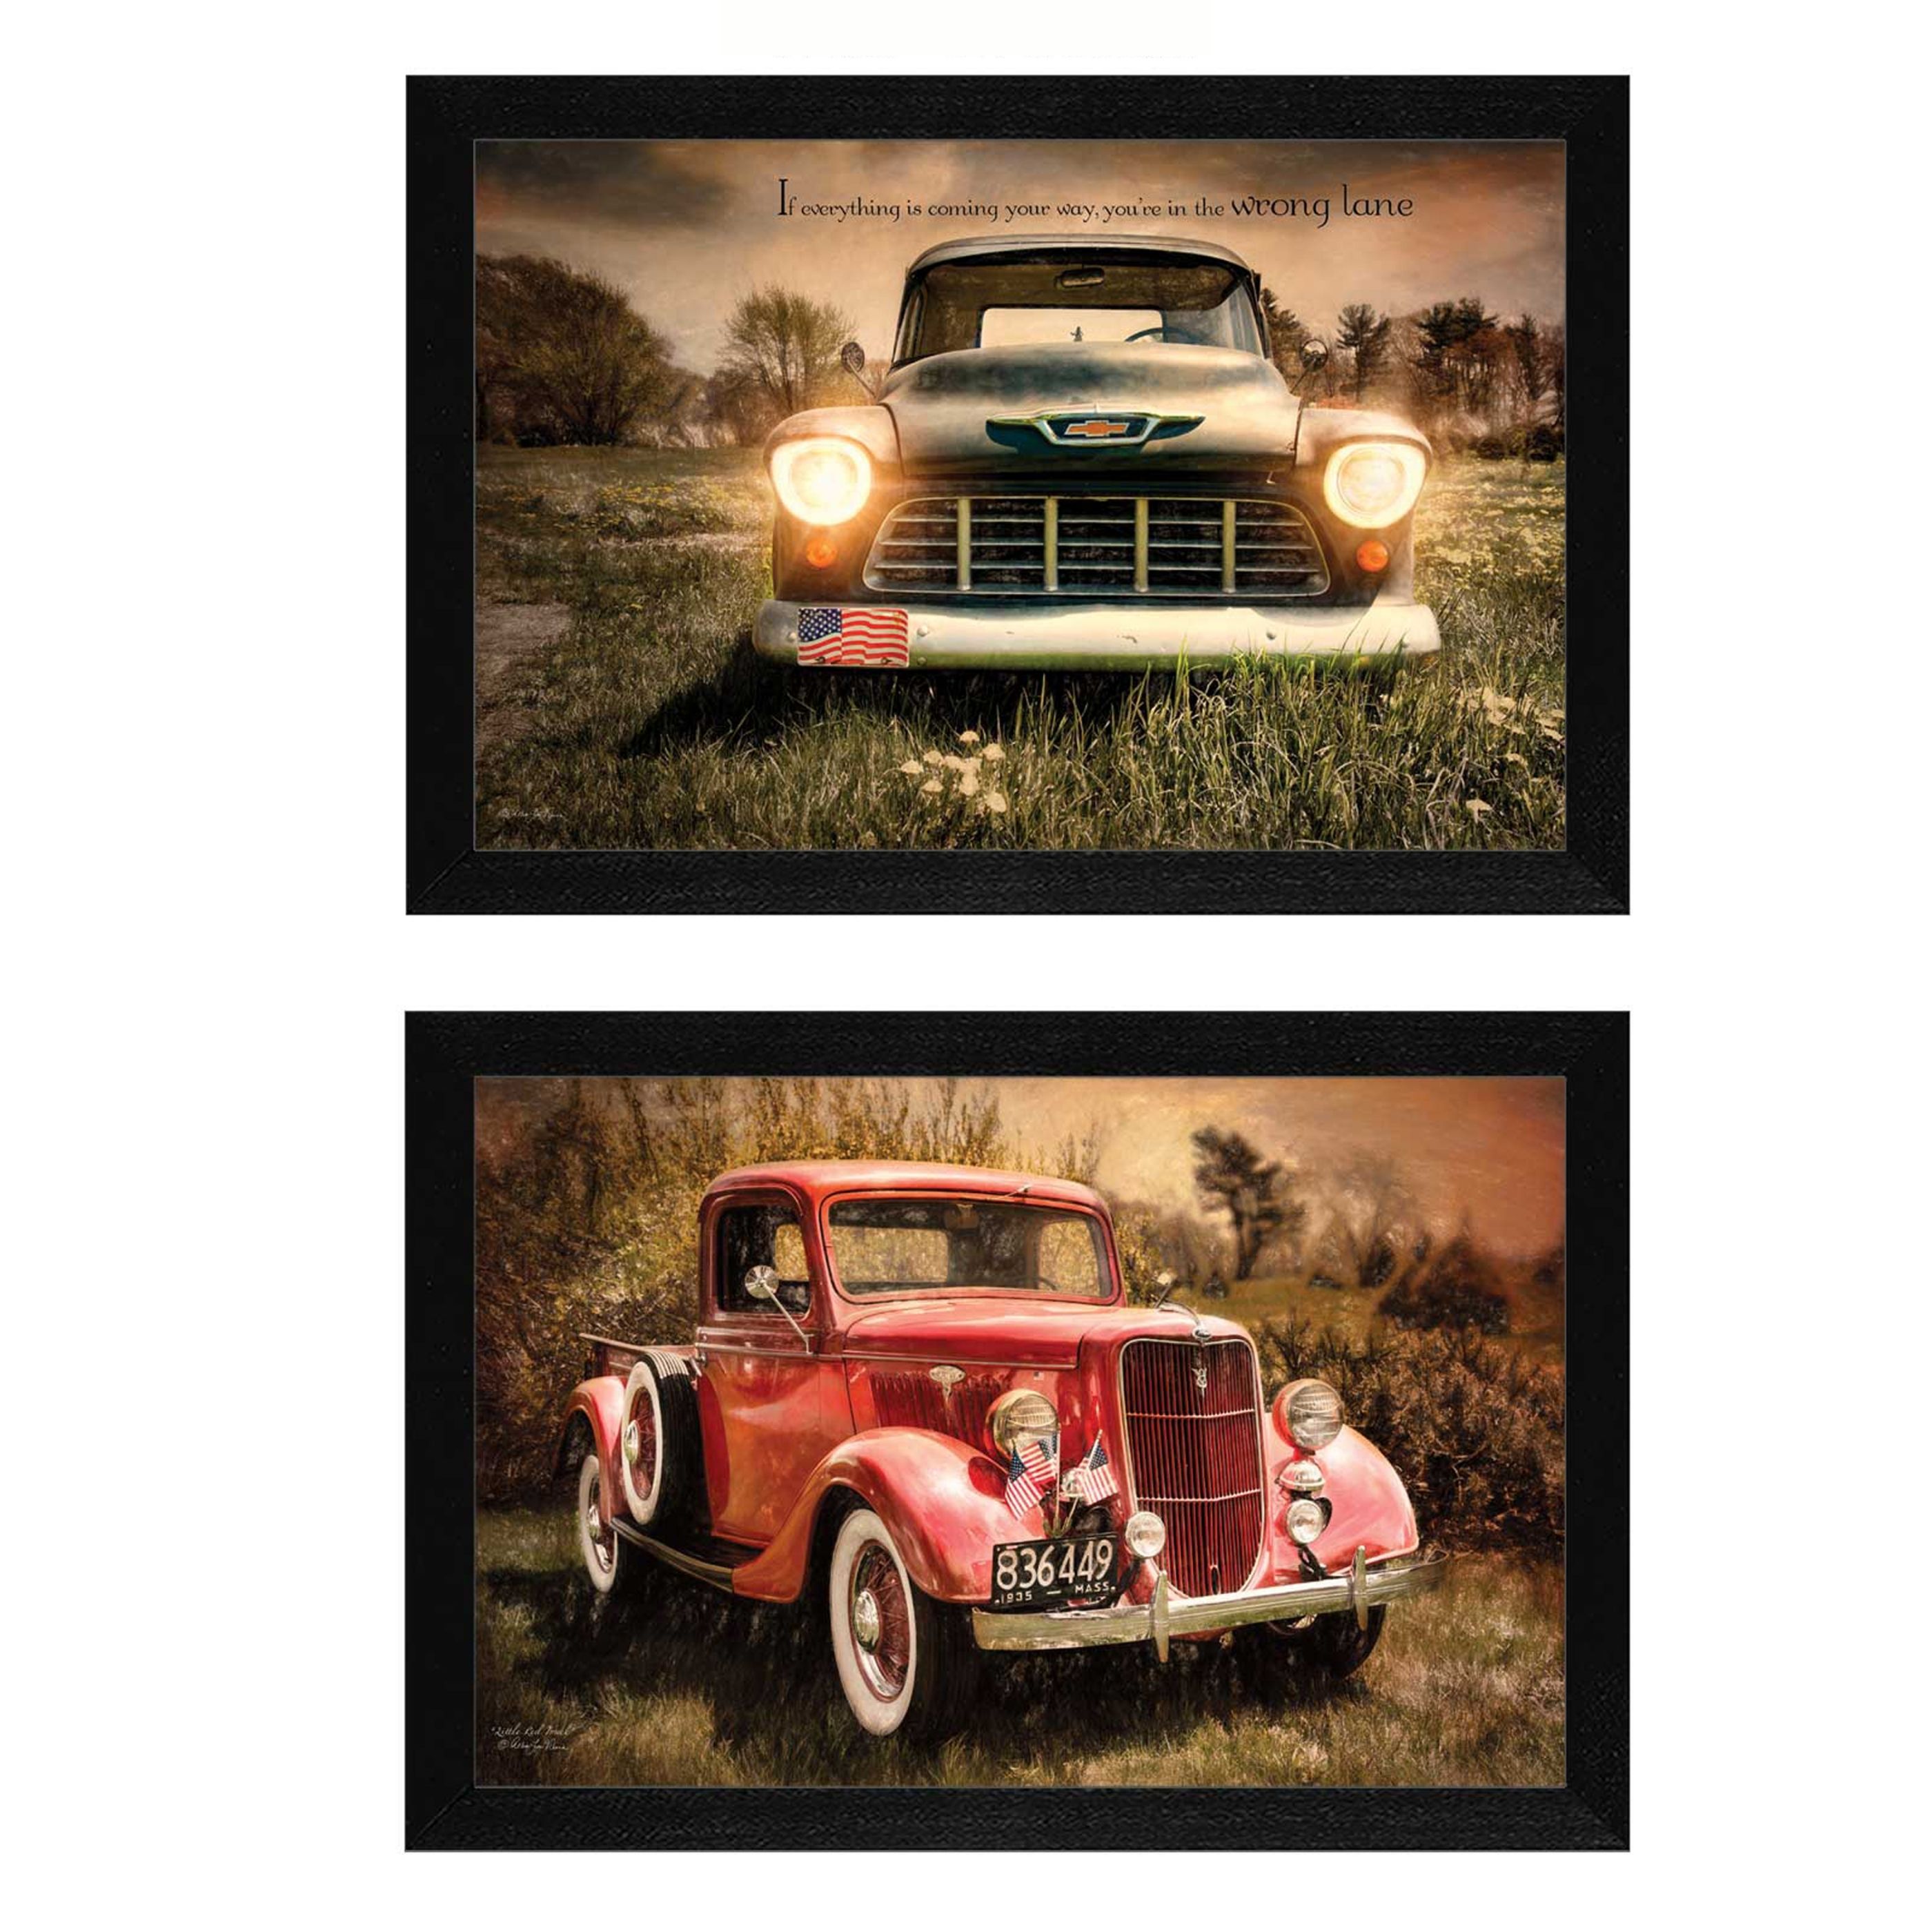 "Vintage Trucks Collection" 2-Piece Vignette By Robin-Lee Vieira, Printed Wall Art, Ready To Hang Framed Poster, Black Frame